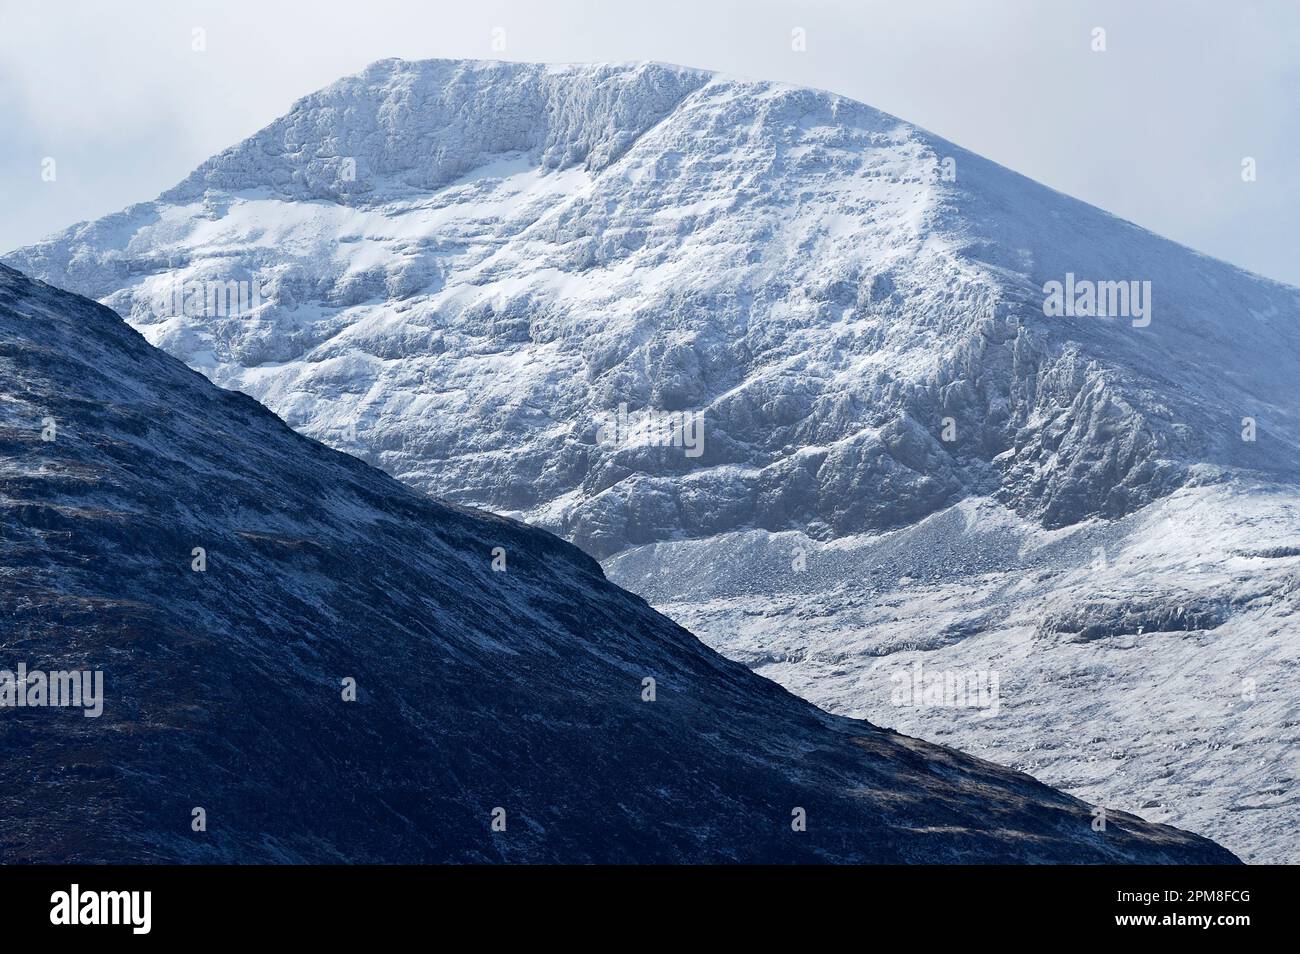 View of snow-capped mountain Ben More. At an elevation of 966m it is the highest mountain and only Munro on the Isle of Mull. Stock Photo